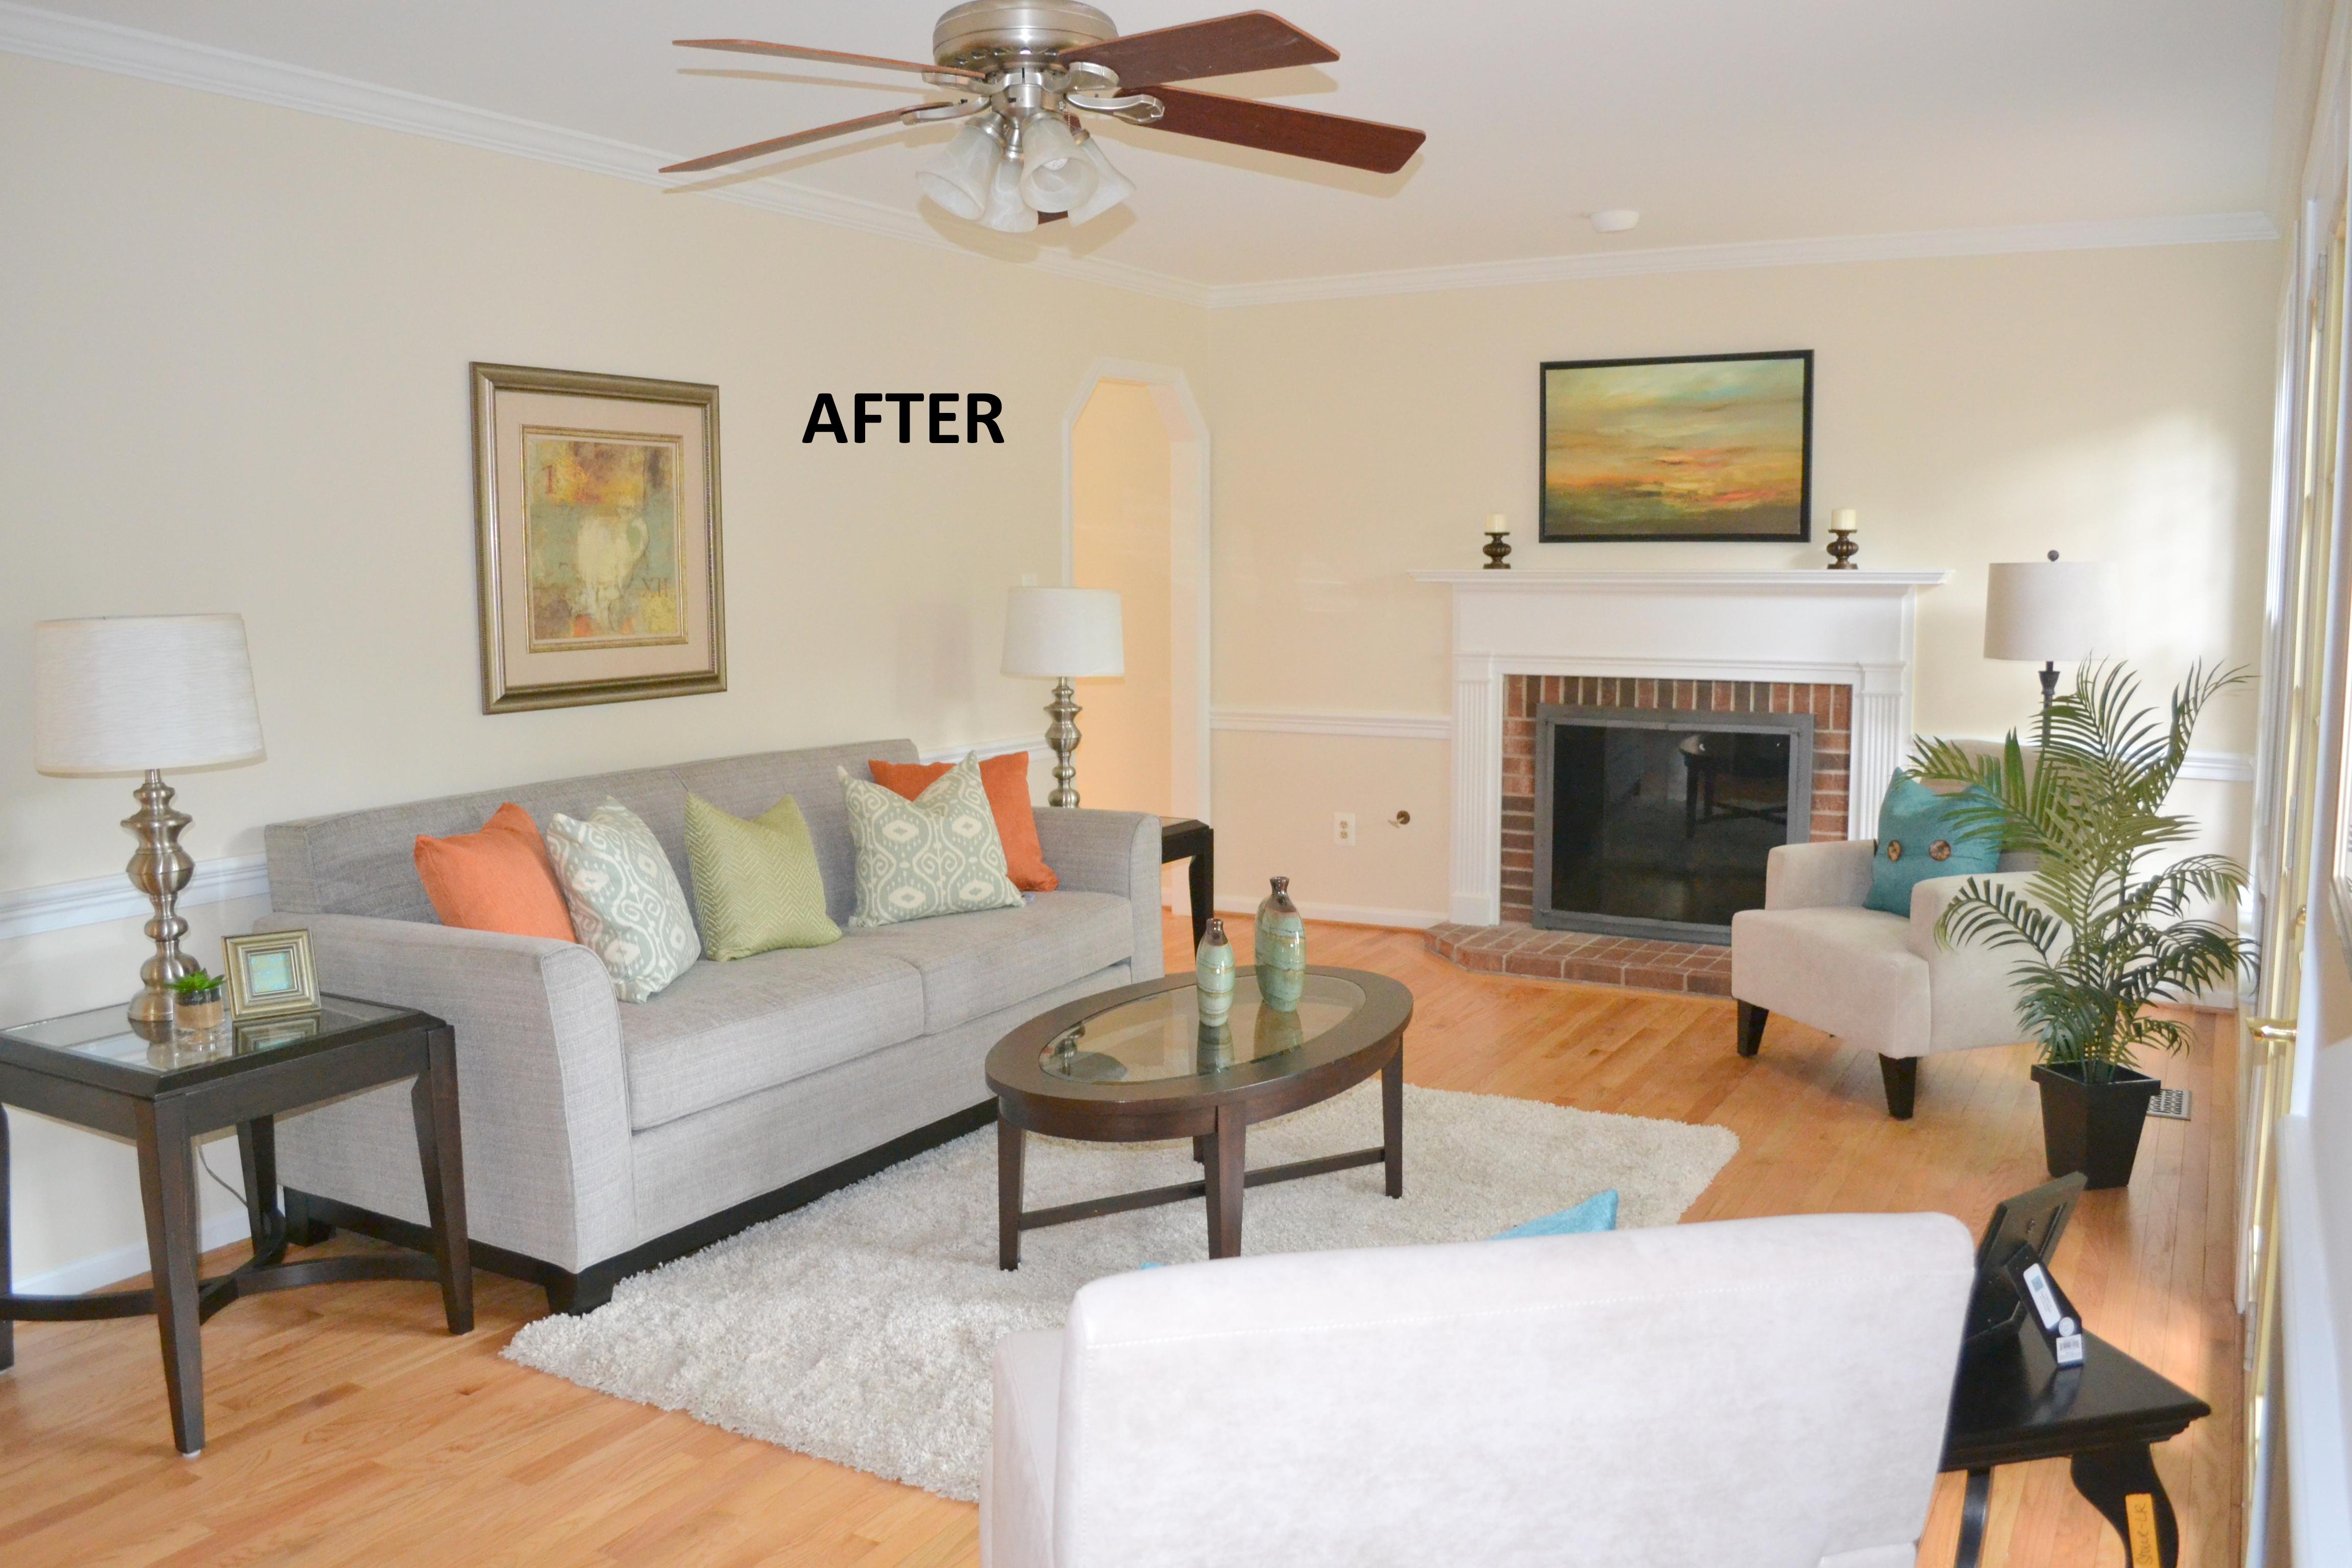 For all of you who were wondering where the AFTER to my BEFORE photo is, this is for you! It is often hard for buyers to visualize a blank slate--or empty room. Staging not only warms the space, but allows buyers to better understand proportions and sizes of rooms. 